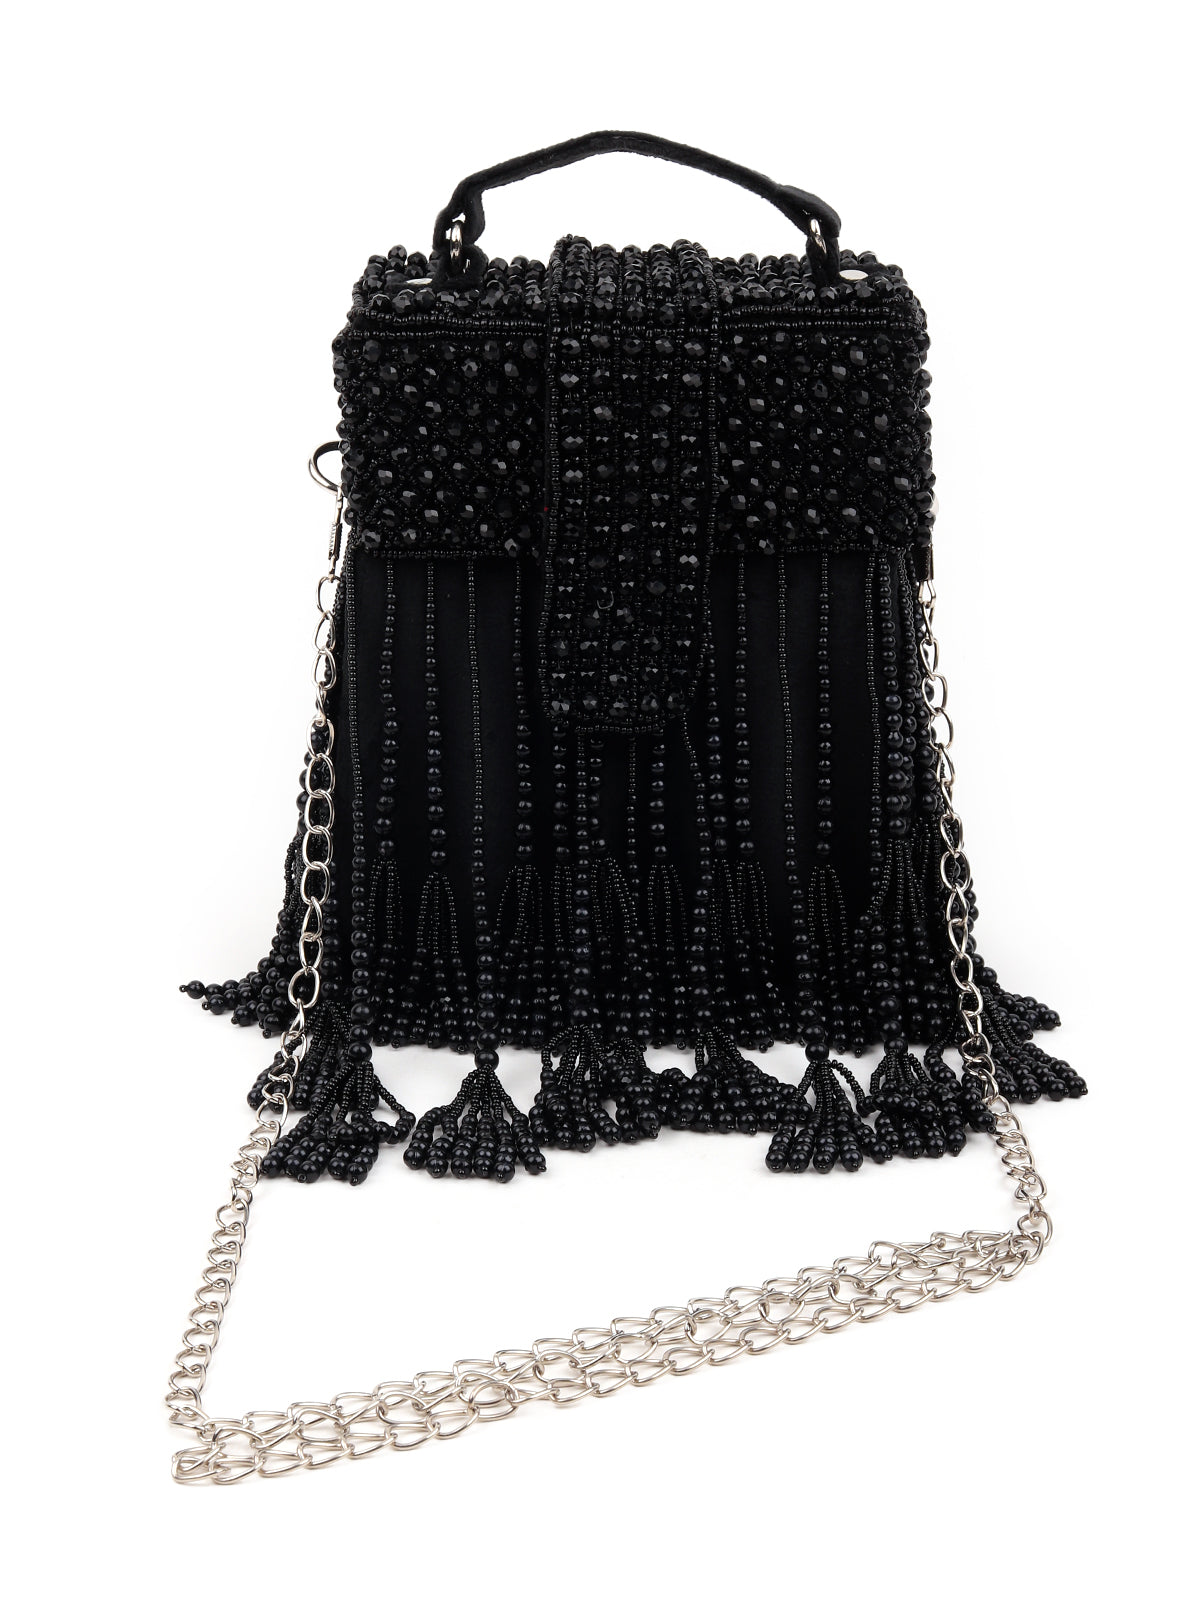 Clare-Rae Luxe Series Leather Saddle Bag With Tassels